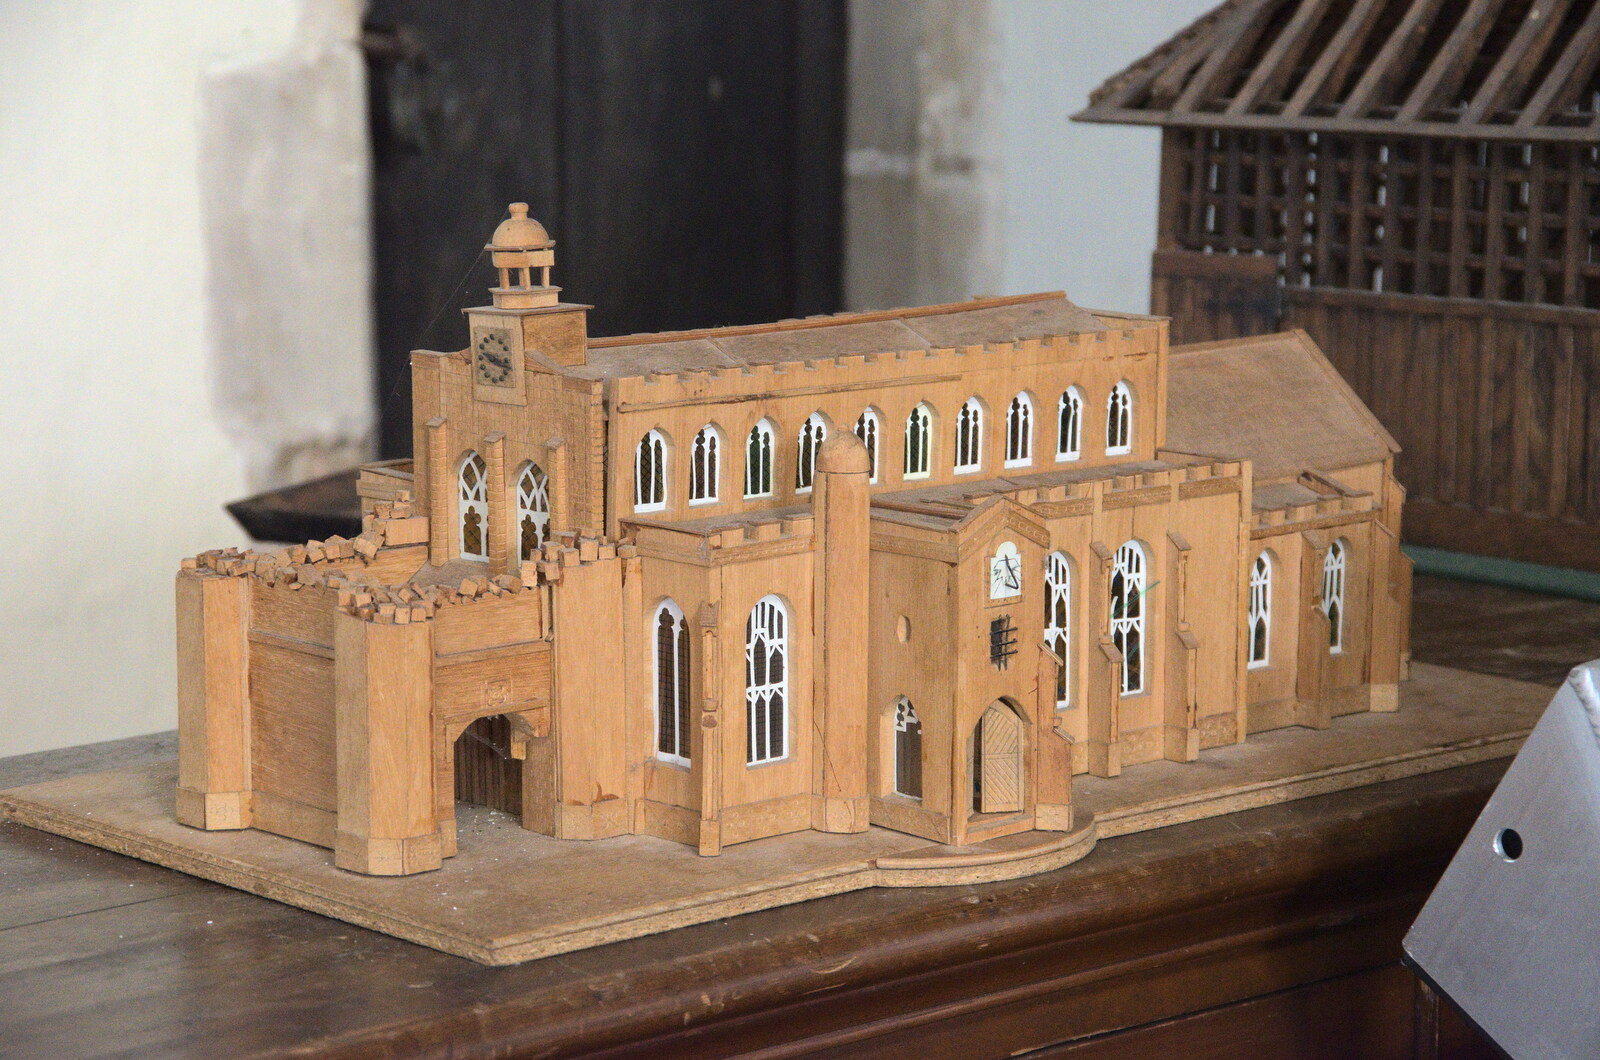 There's a model of the church in the church from A Postcard from Flatford and Dedham, Suffolk and Essex, 9th November 2022